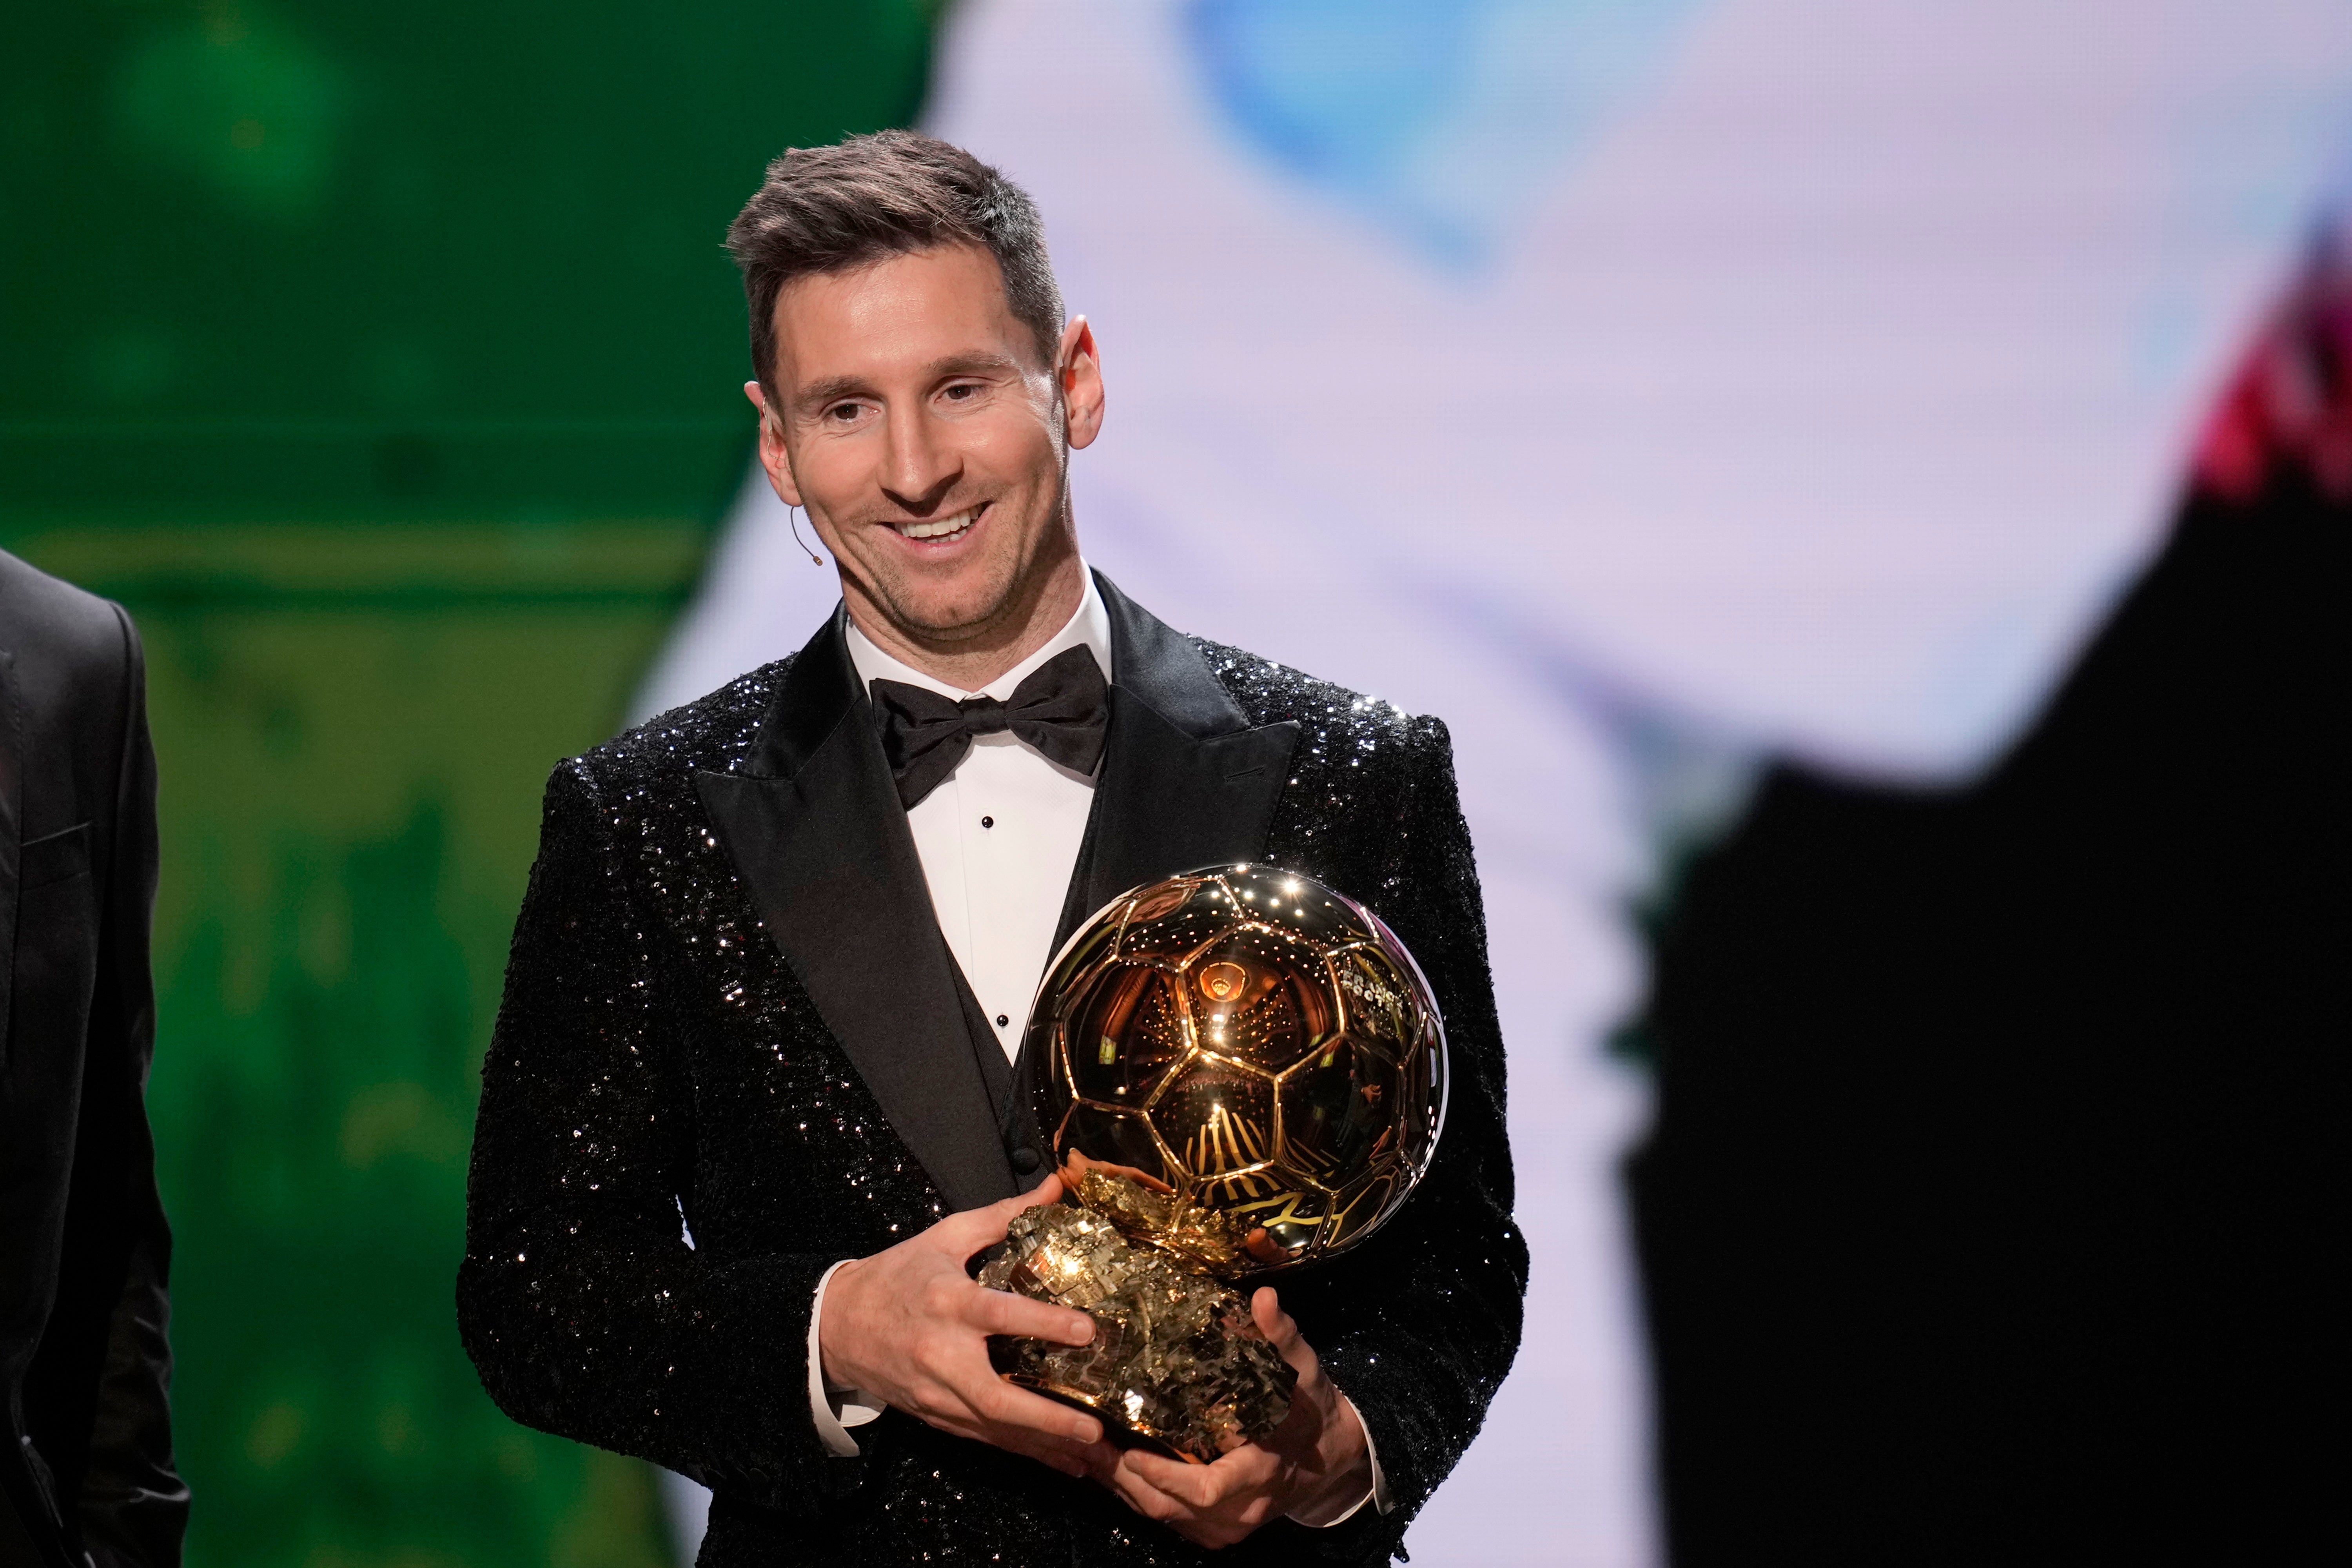 Ballon d'Or contenders for 2021